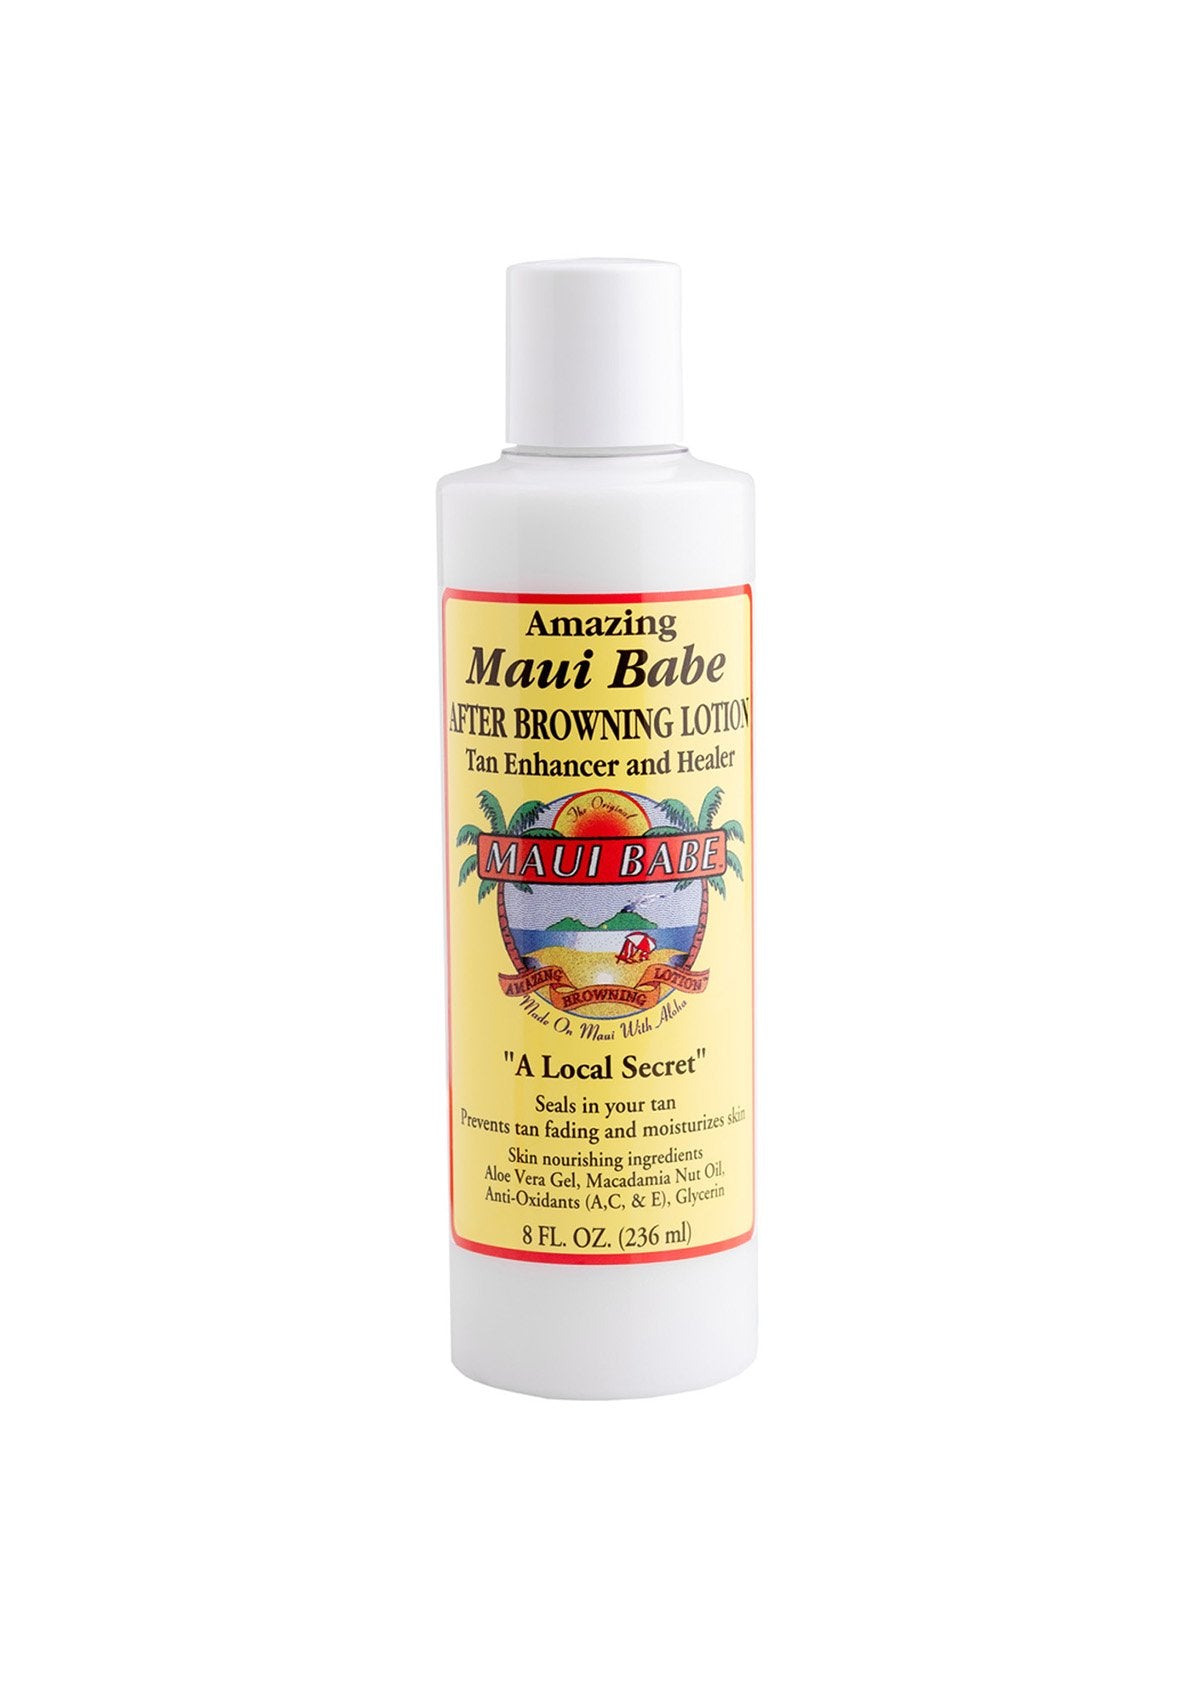 Maui Babe 8 OZ. After Browning Lotion